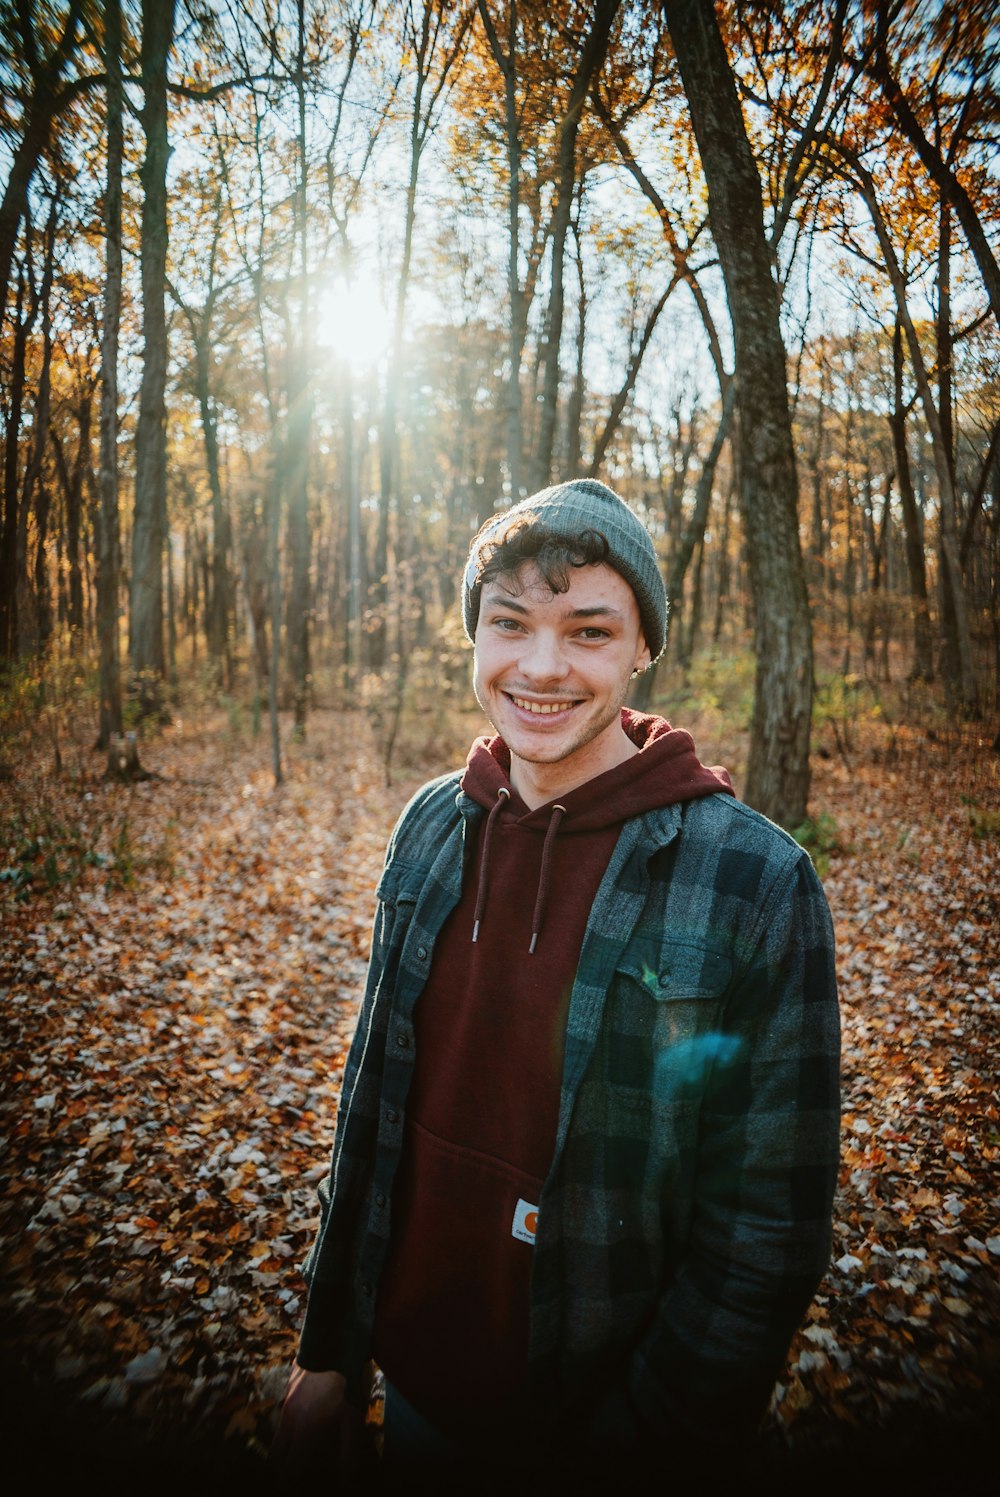 a young man standing in a forest with leaves on the ground